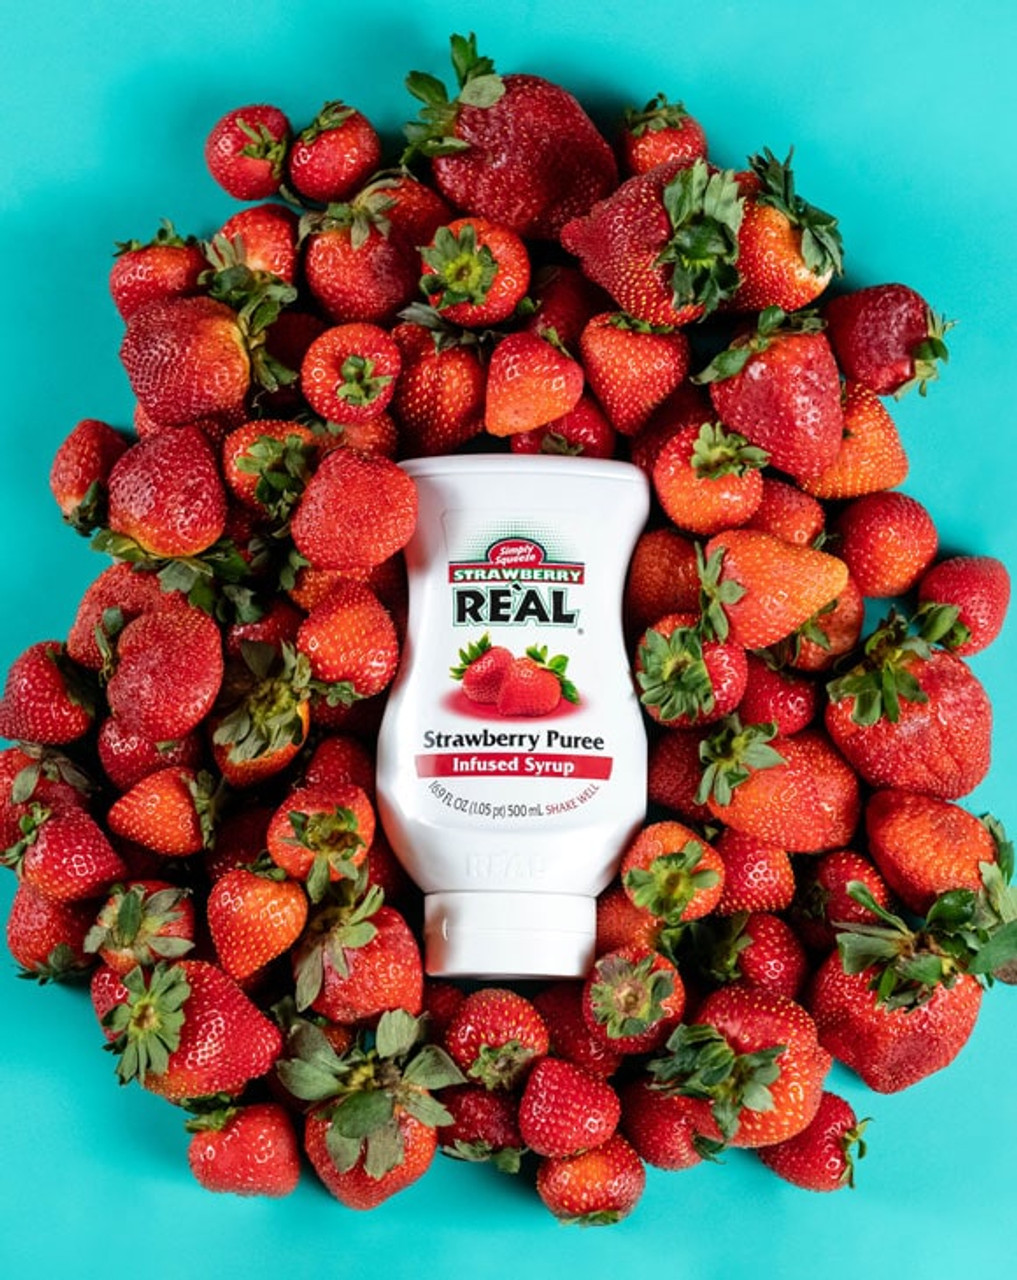 Real 16.9 fl. oz. Strawberry Puree Infused Syrup - Sweet Strawberry Flavor - Chicken Pieces